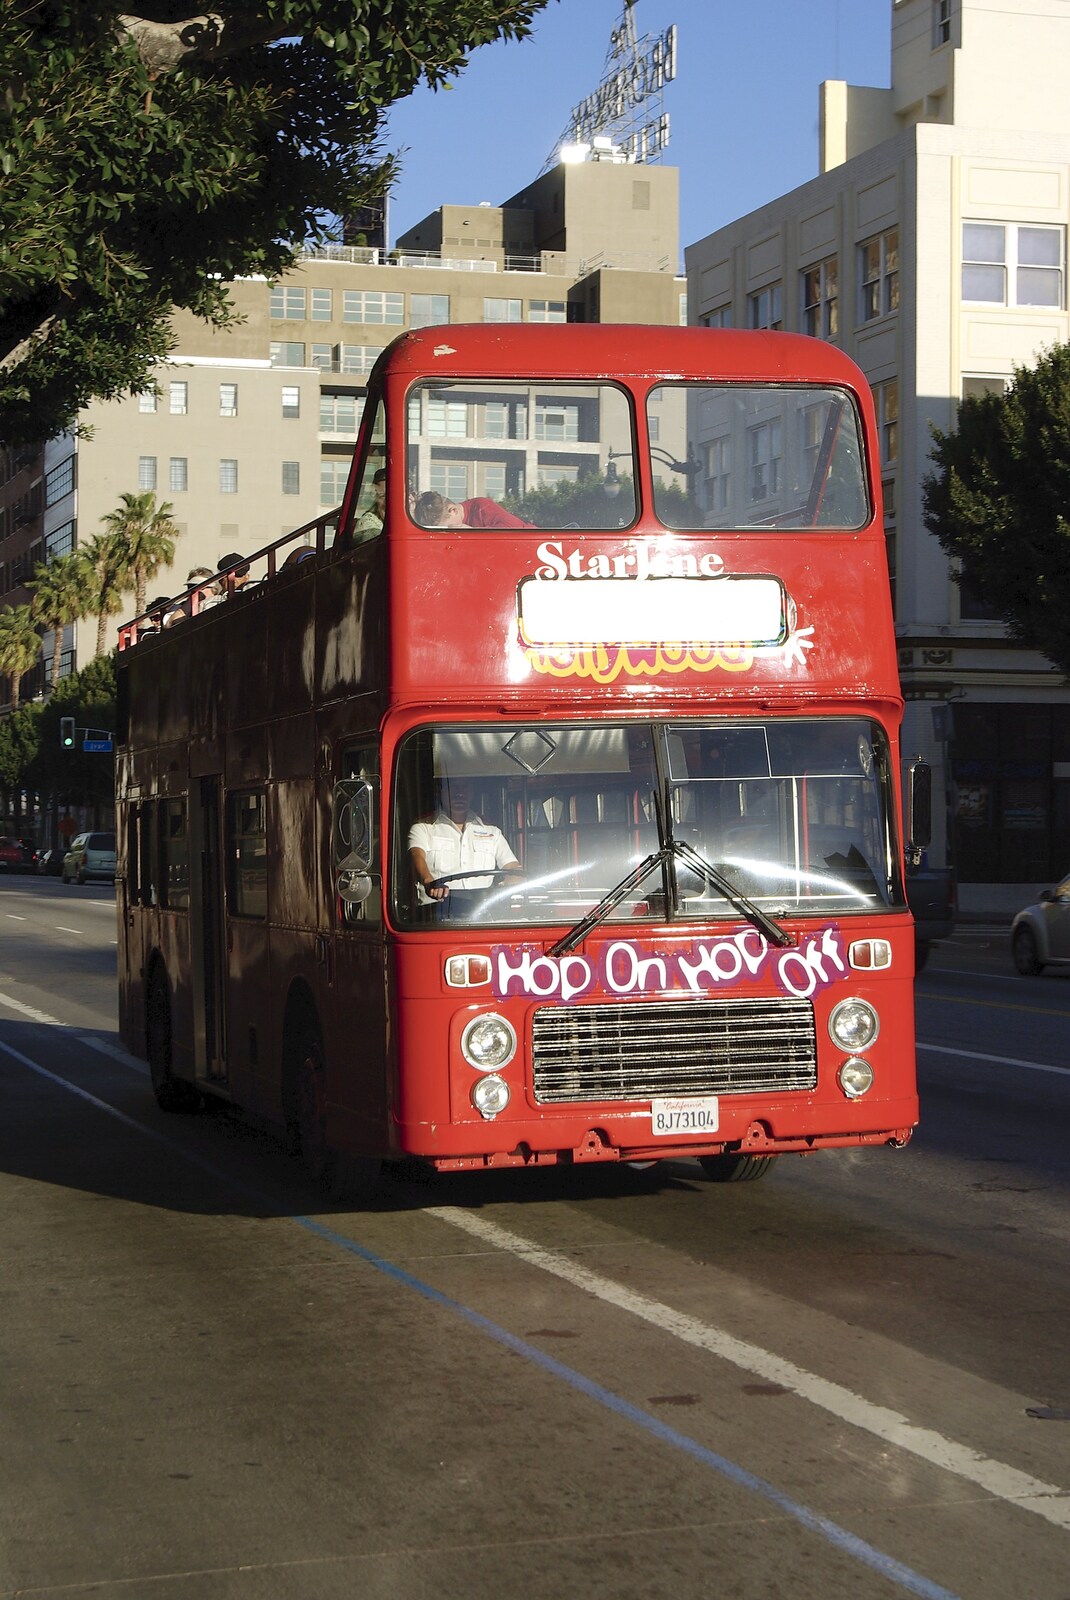 San Diego and Hollywood, California, US - 3rd March 2008: A London-style bus